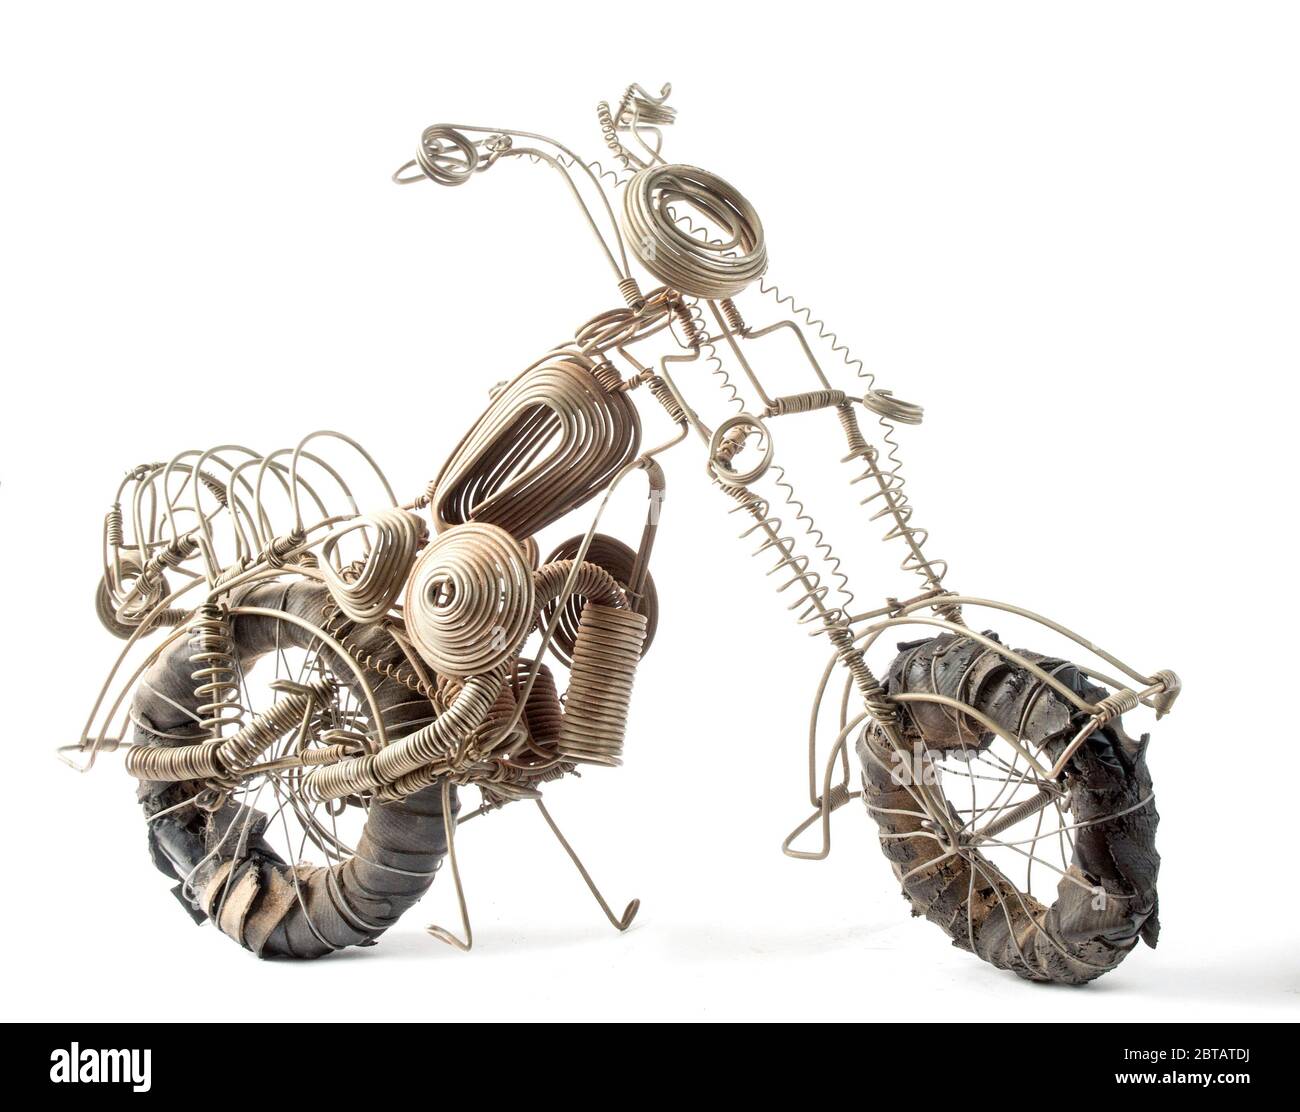 Photo of a detailed hand made wire model of a motorcycle made by a young Malawian near Lake Malawi. All parts are fashioned from various bits of wire Stock Photo